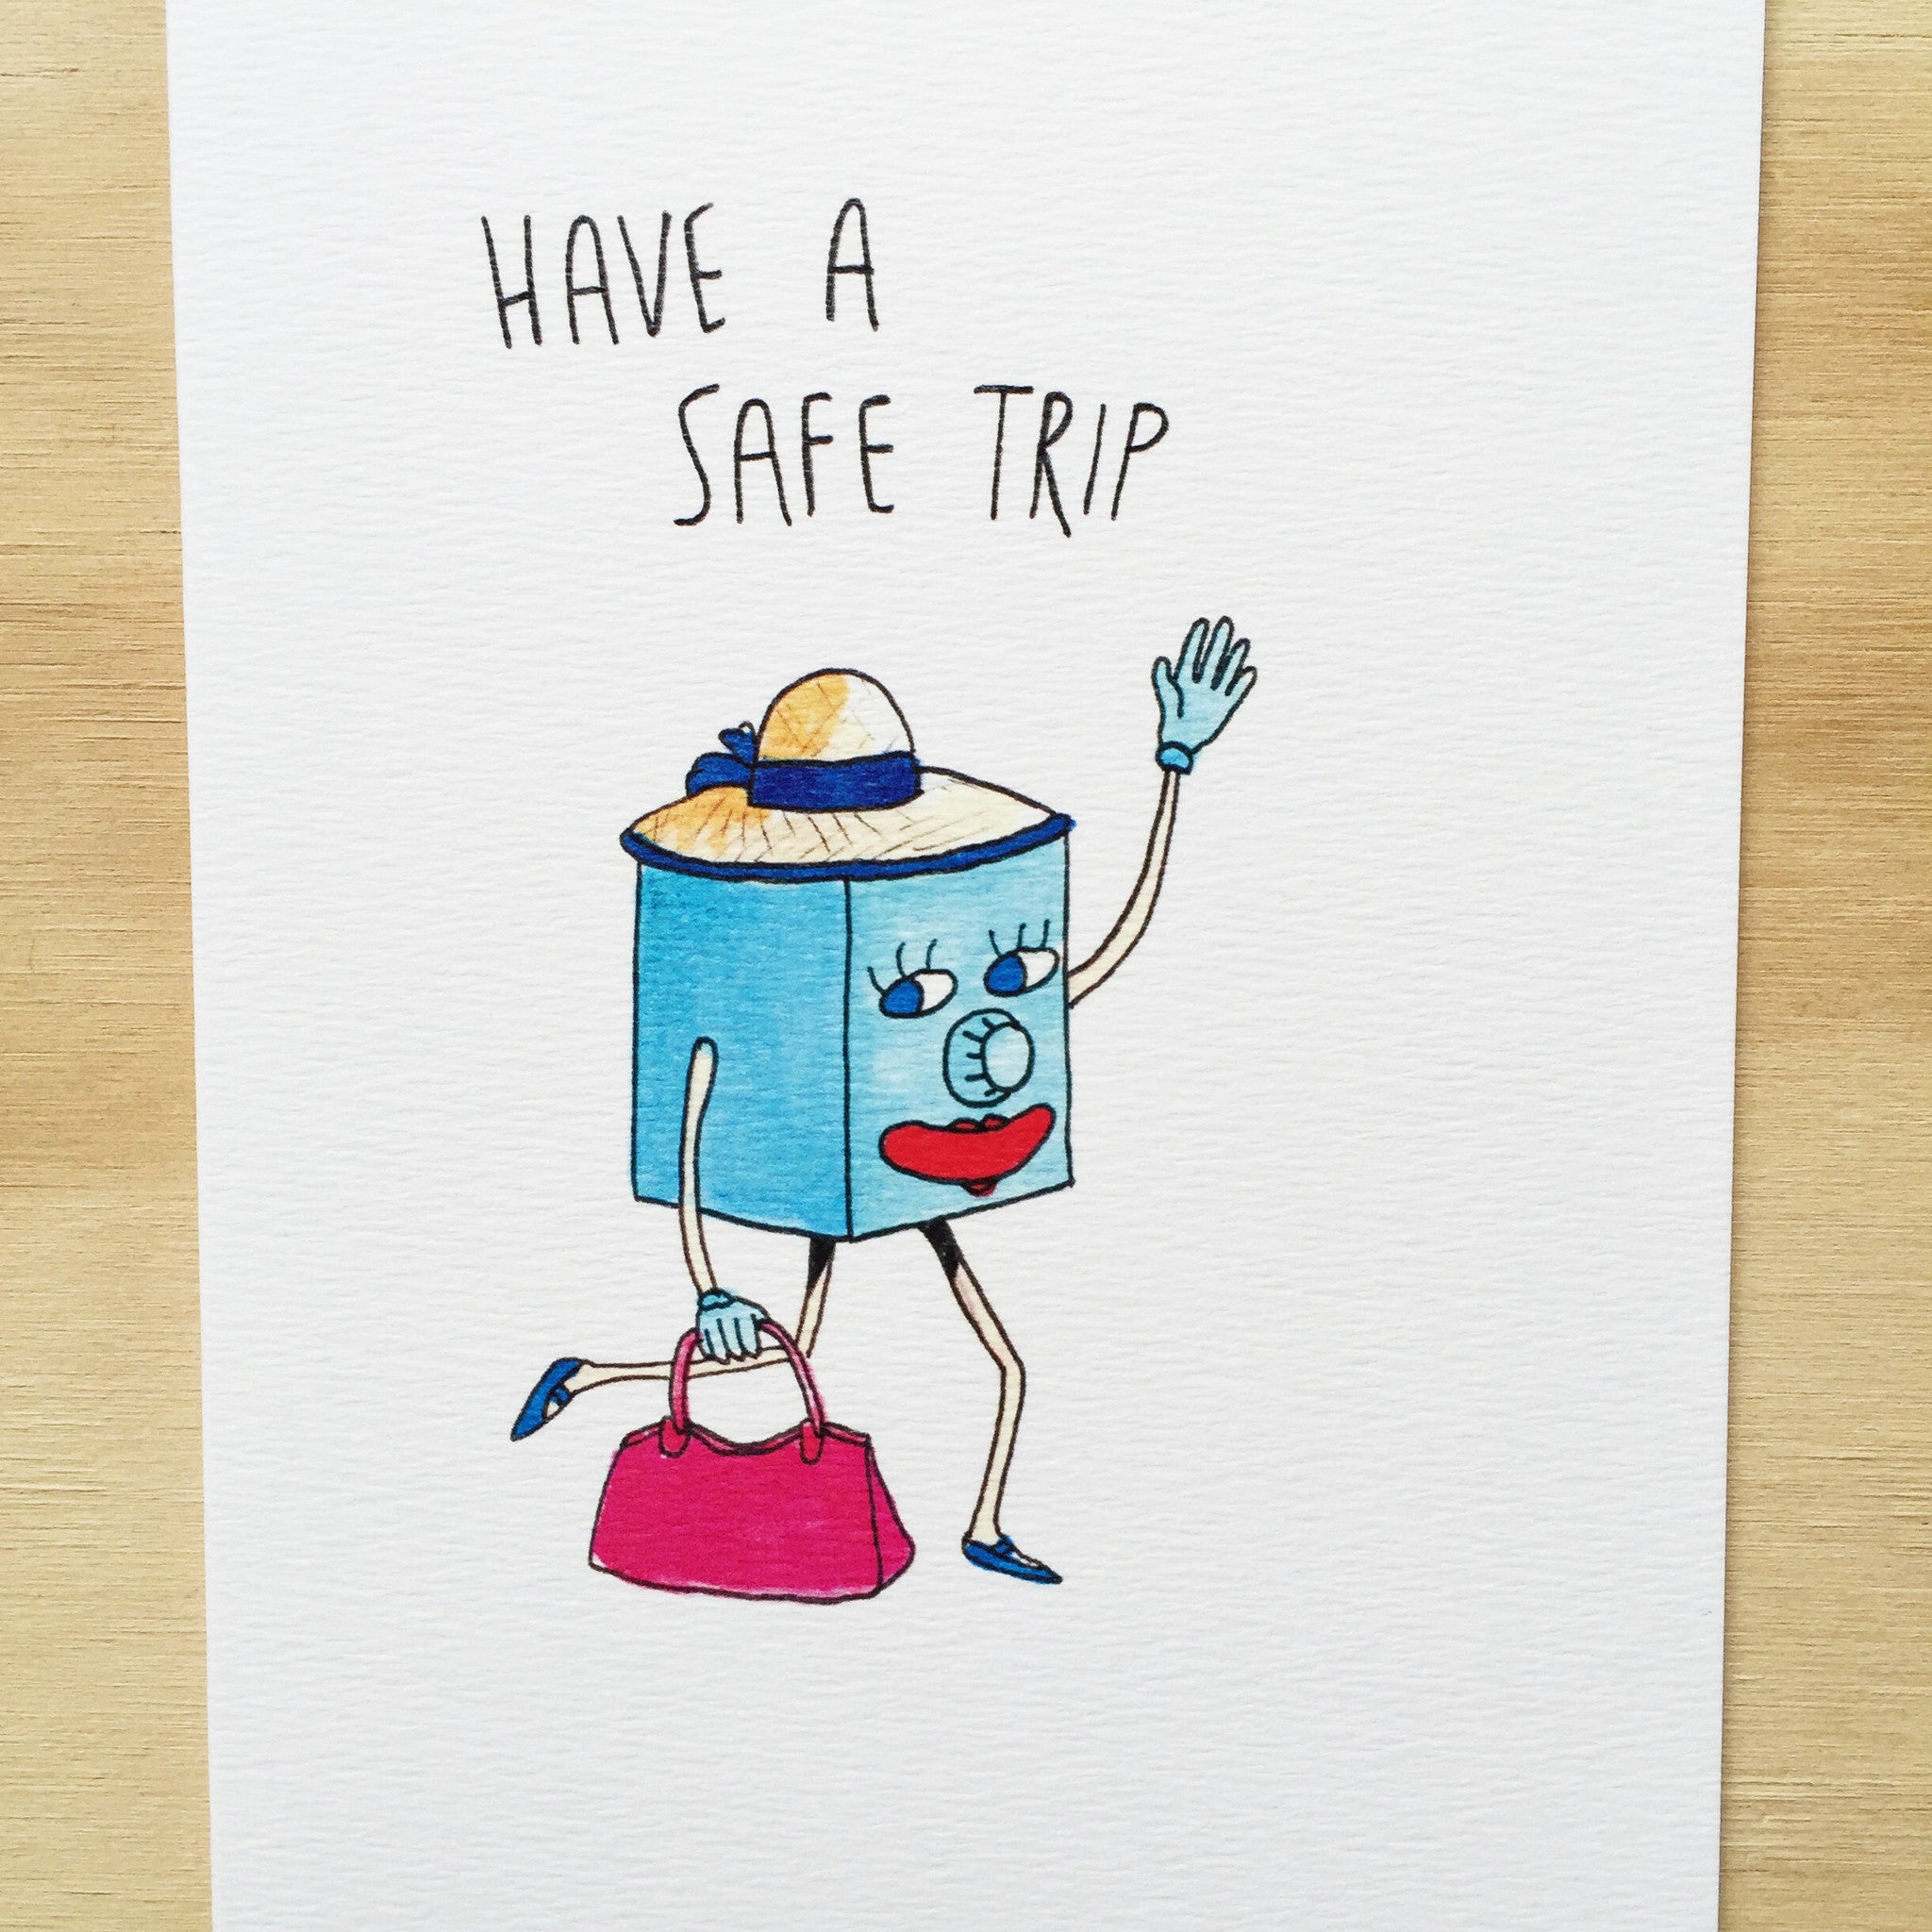 Have A Safe Trip - Well Drawn